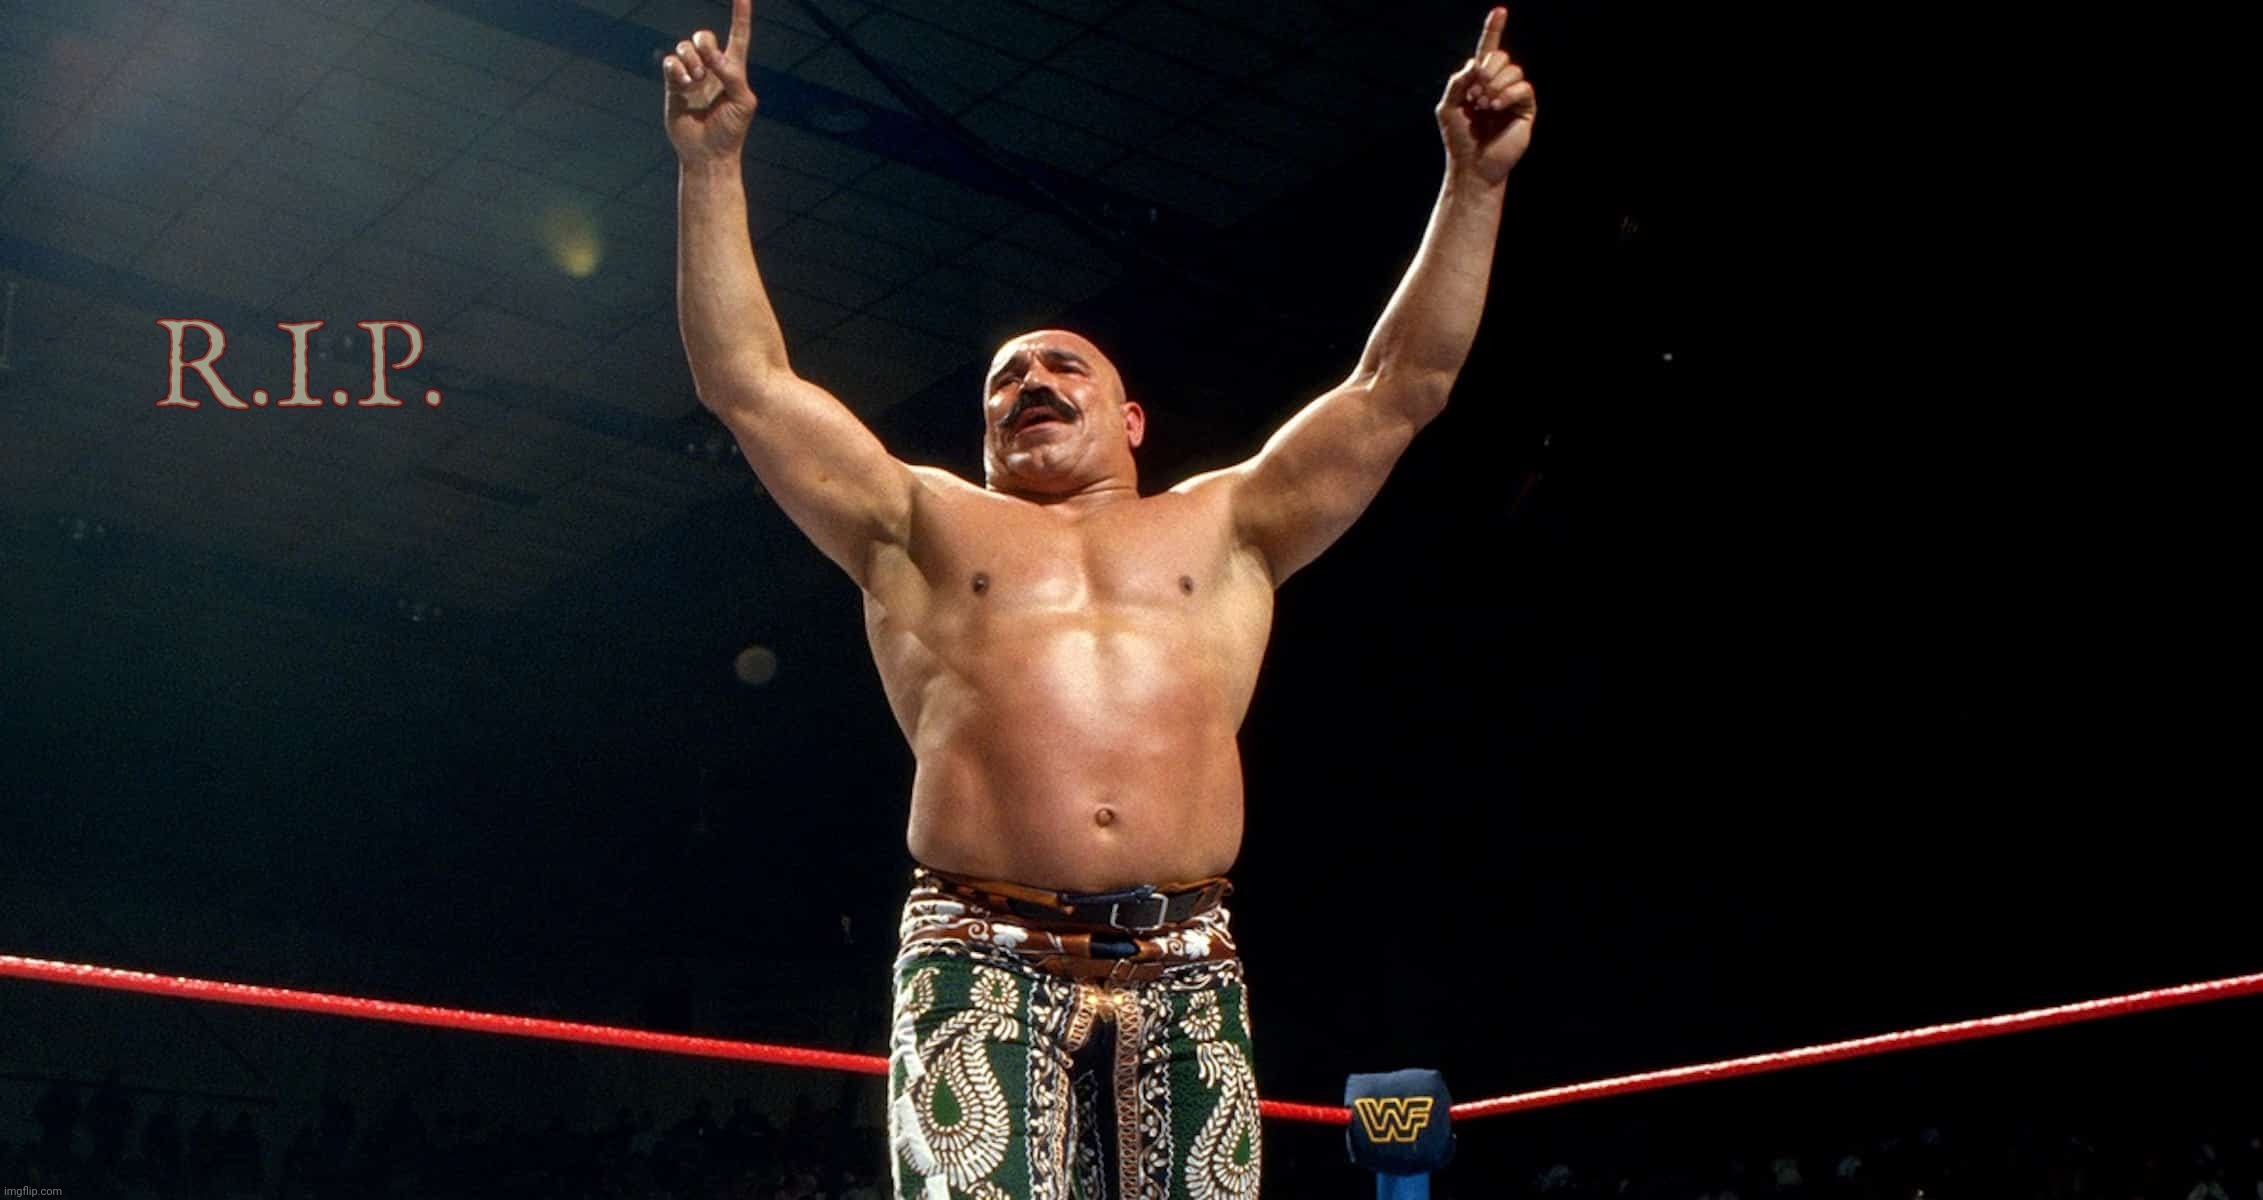 R.I.P. Iron Sheik, thanks for the memories and the unbounded joy, you wonderful man | R.I.P. | image tagged in iron sheik,hossein khosrow ali vaziri,september 9 1942 - june 7 2023,maybe march 15 1942,world wrestling,rip | made w/ Imgflip meme maker